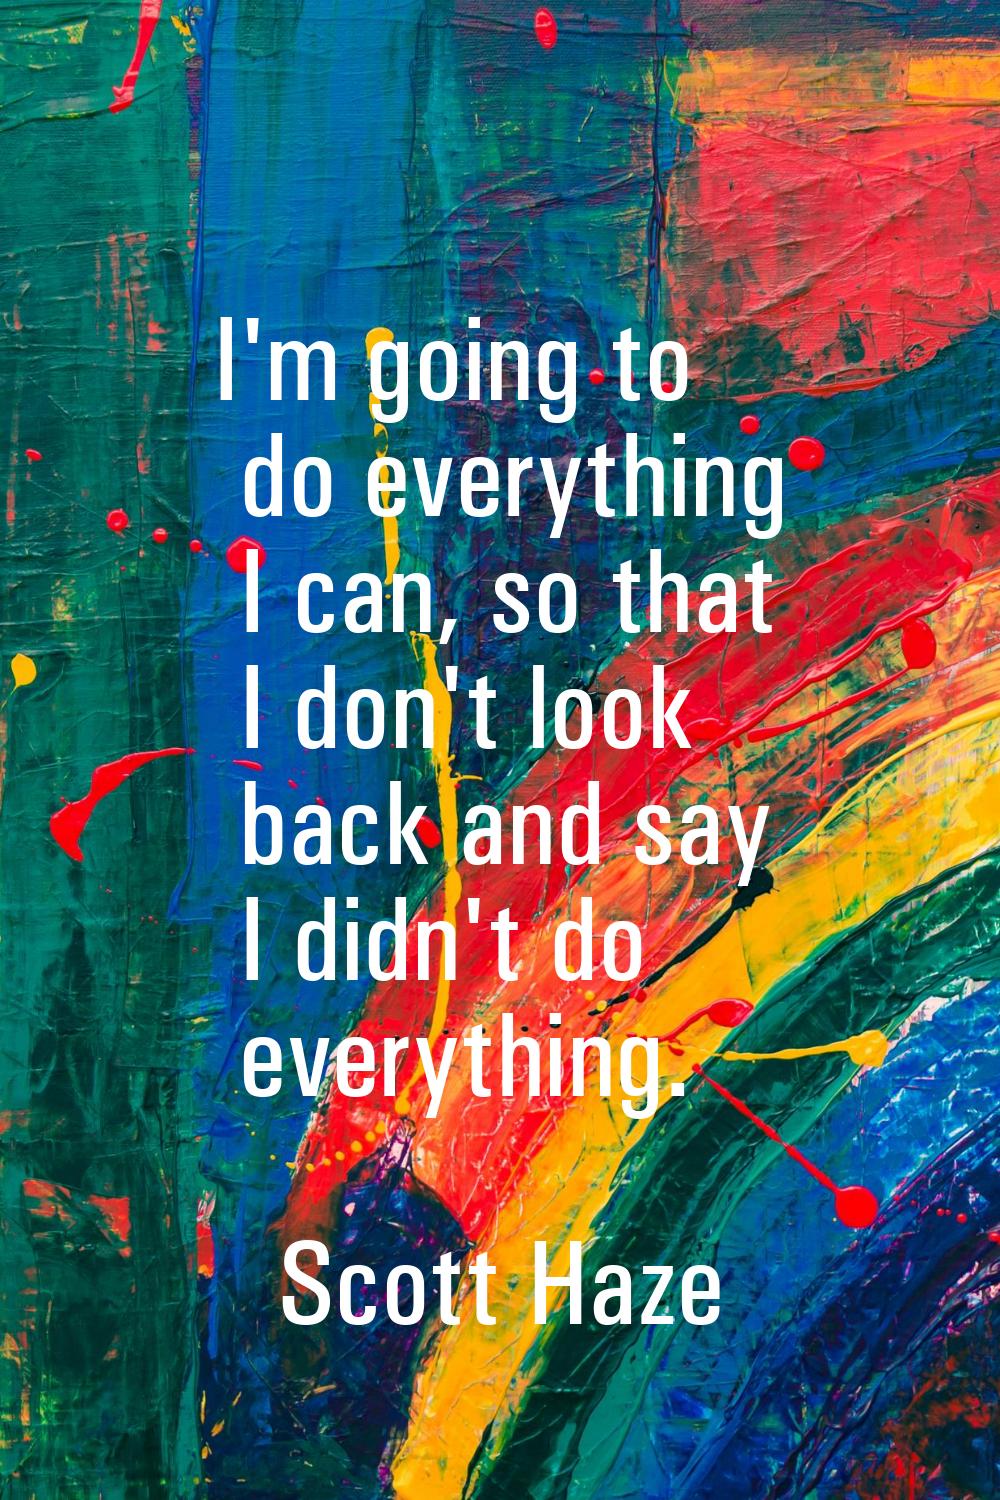 I'm going to do everything I can, so that I don't look back and say I didn't do everything.